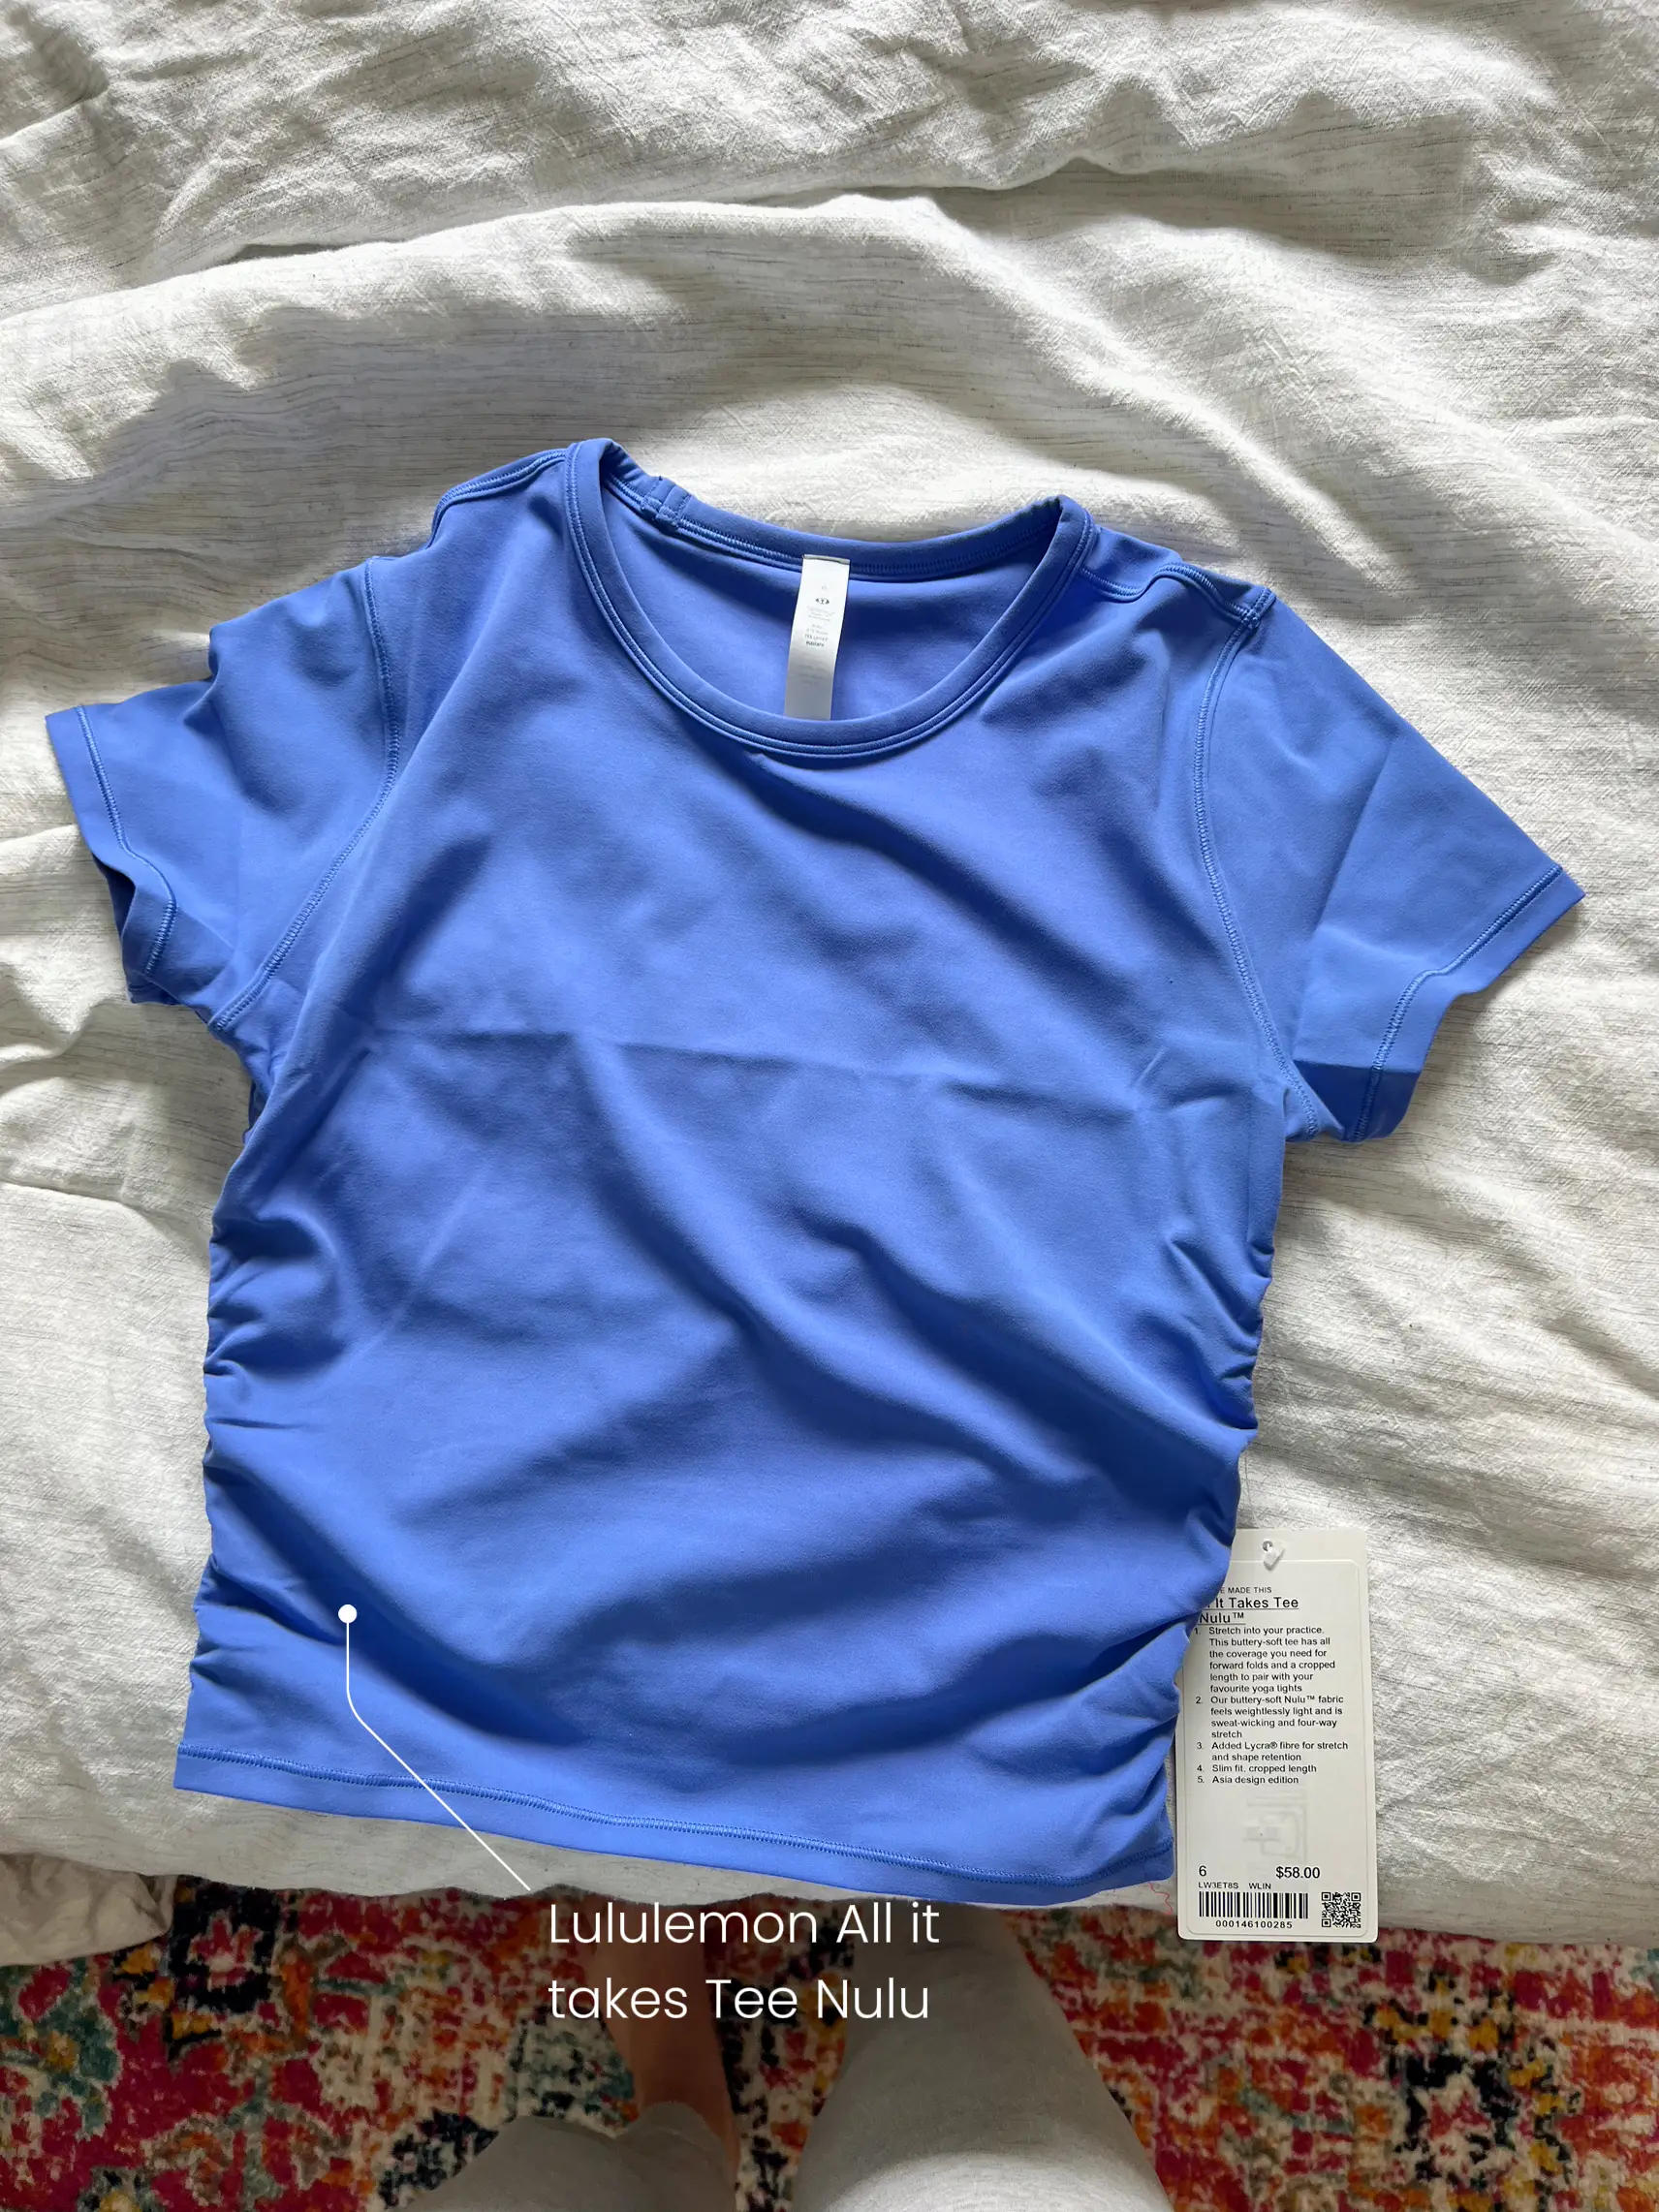 The comparison no one asked for: Classic-Fit Cotton-Blend T-Shirt vs Cates  Tee! Details in the comments : r/lululemon